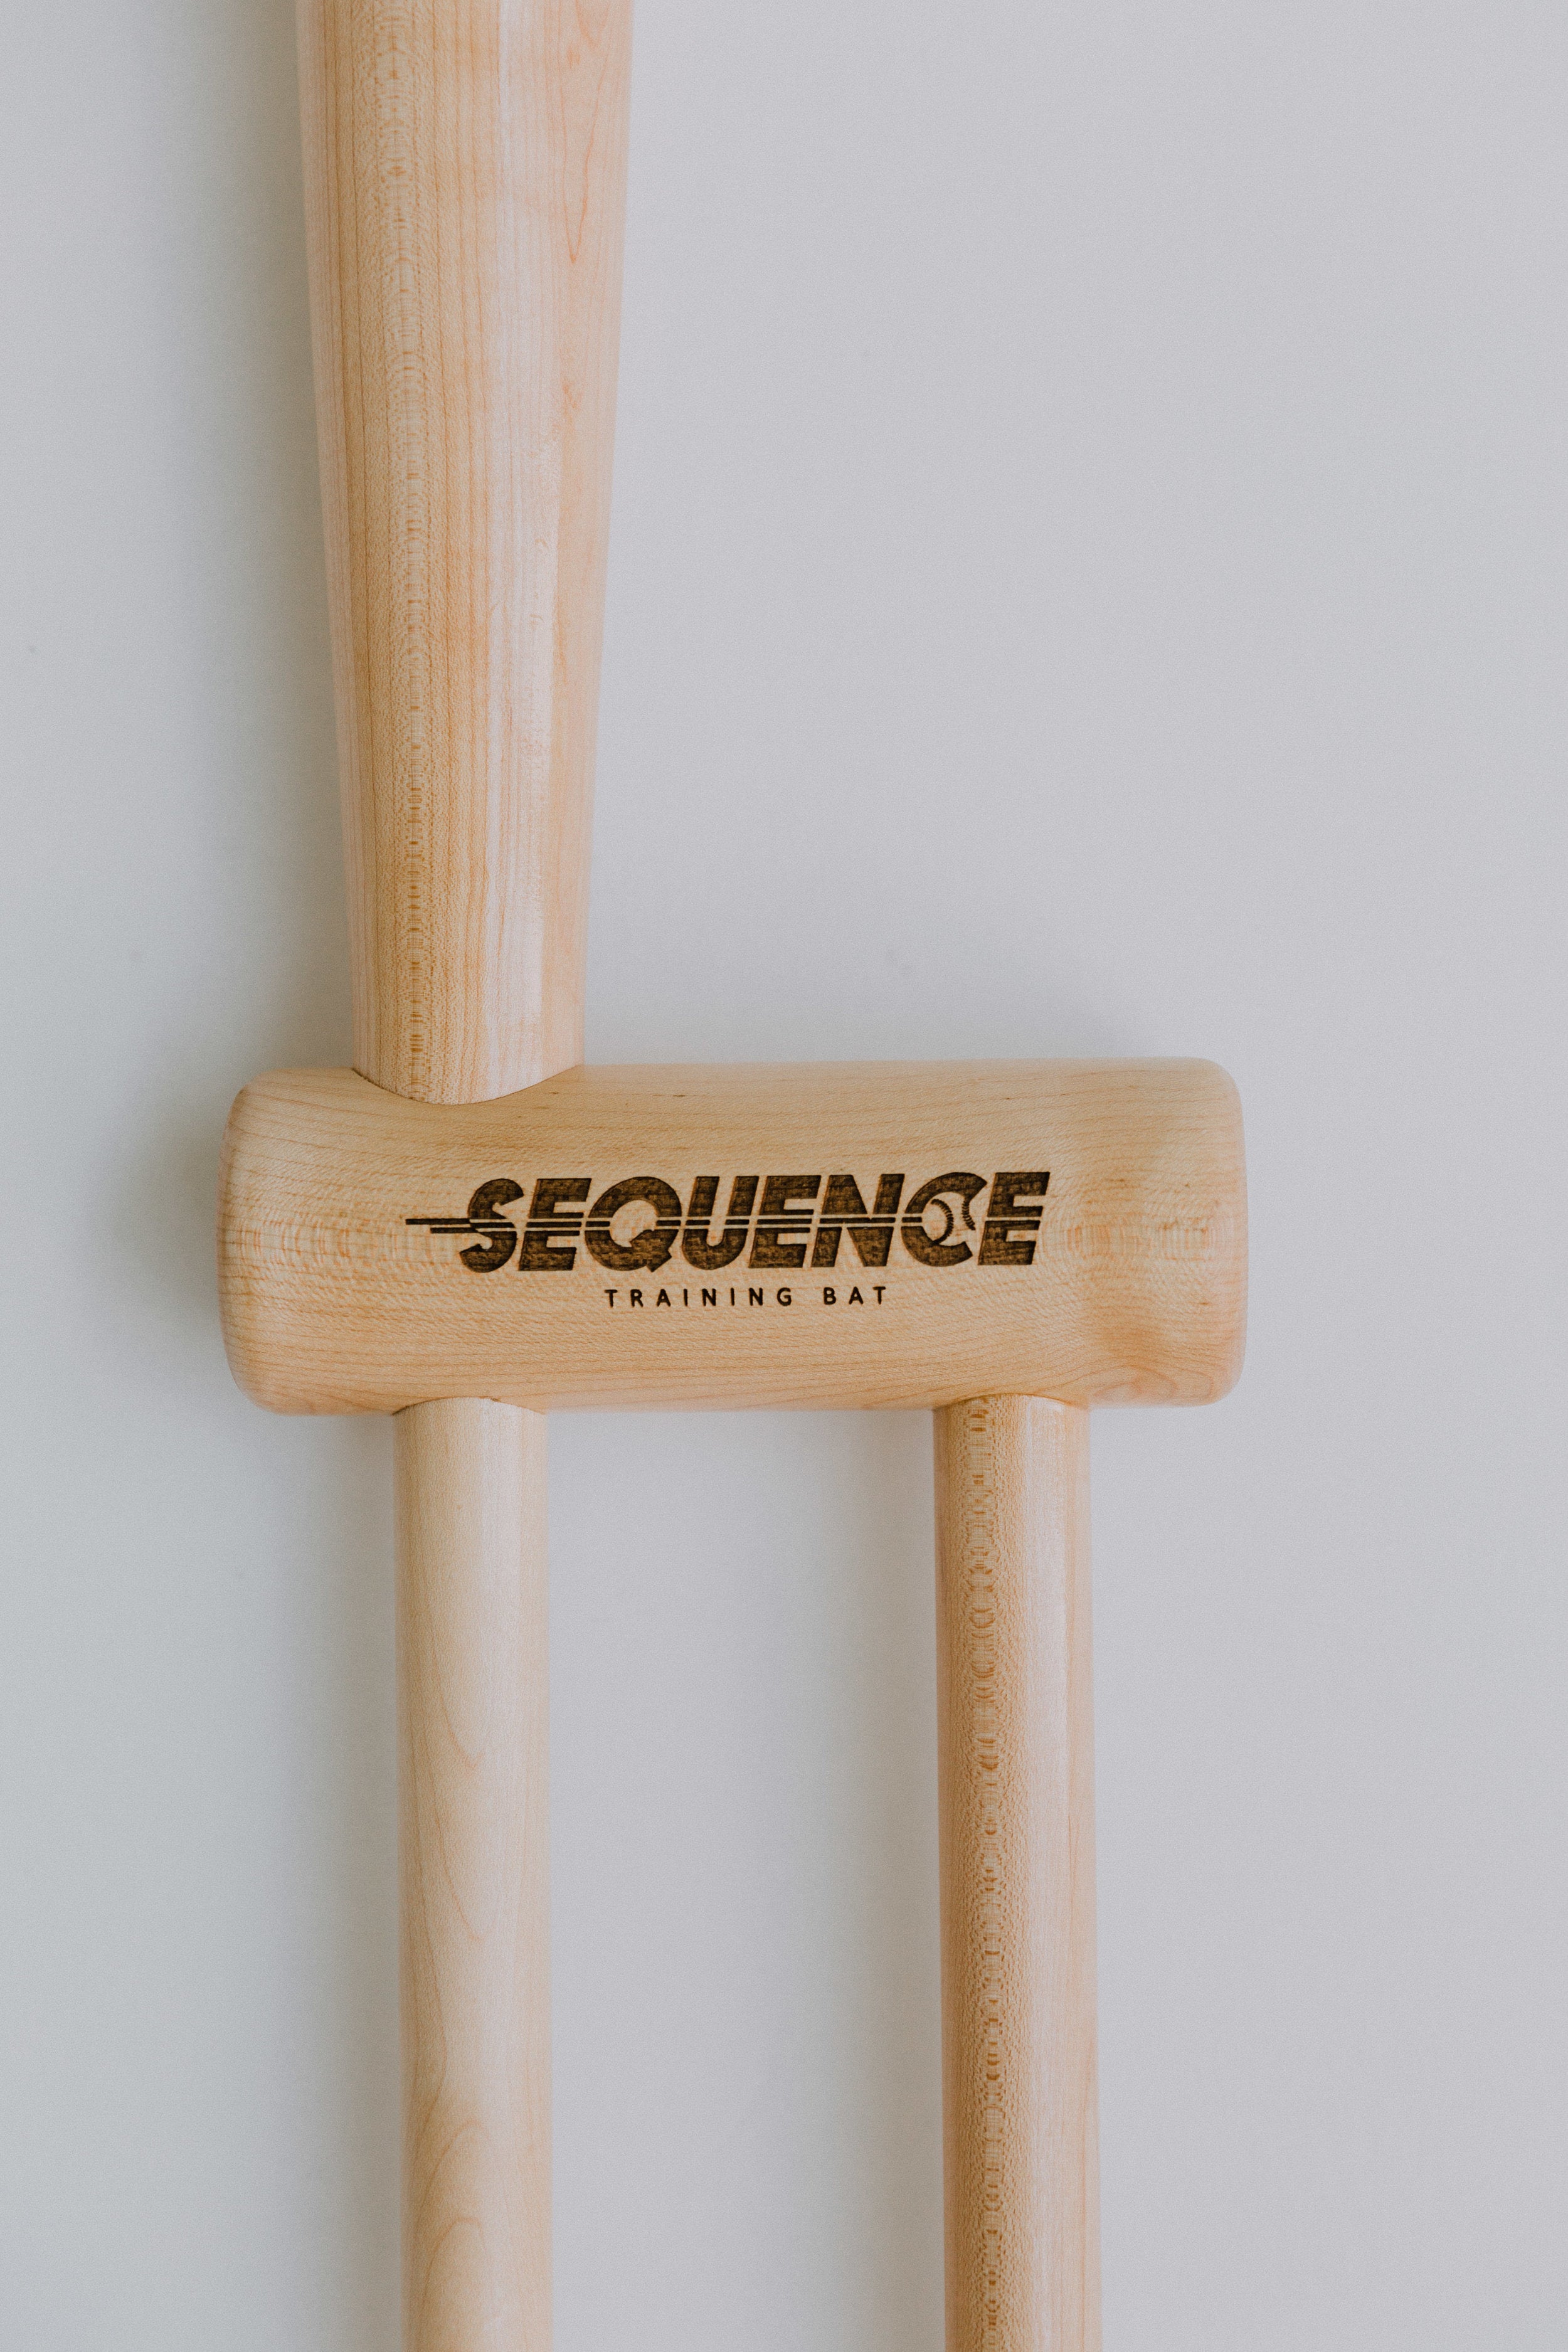 The Sequence Training Bat